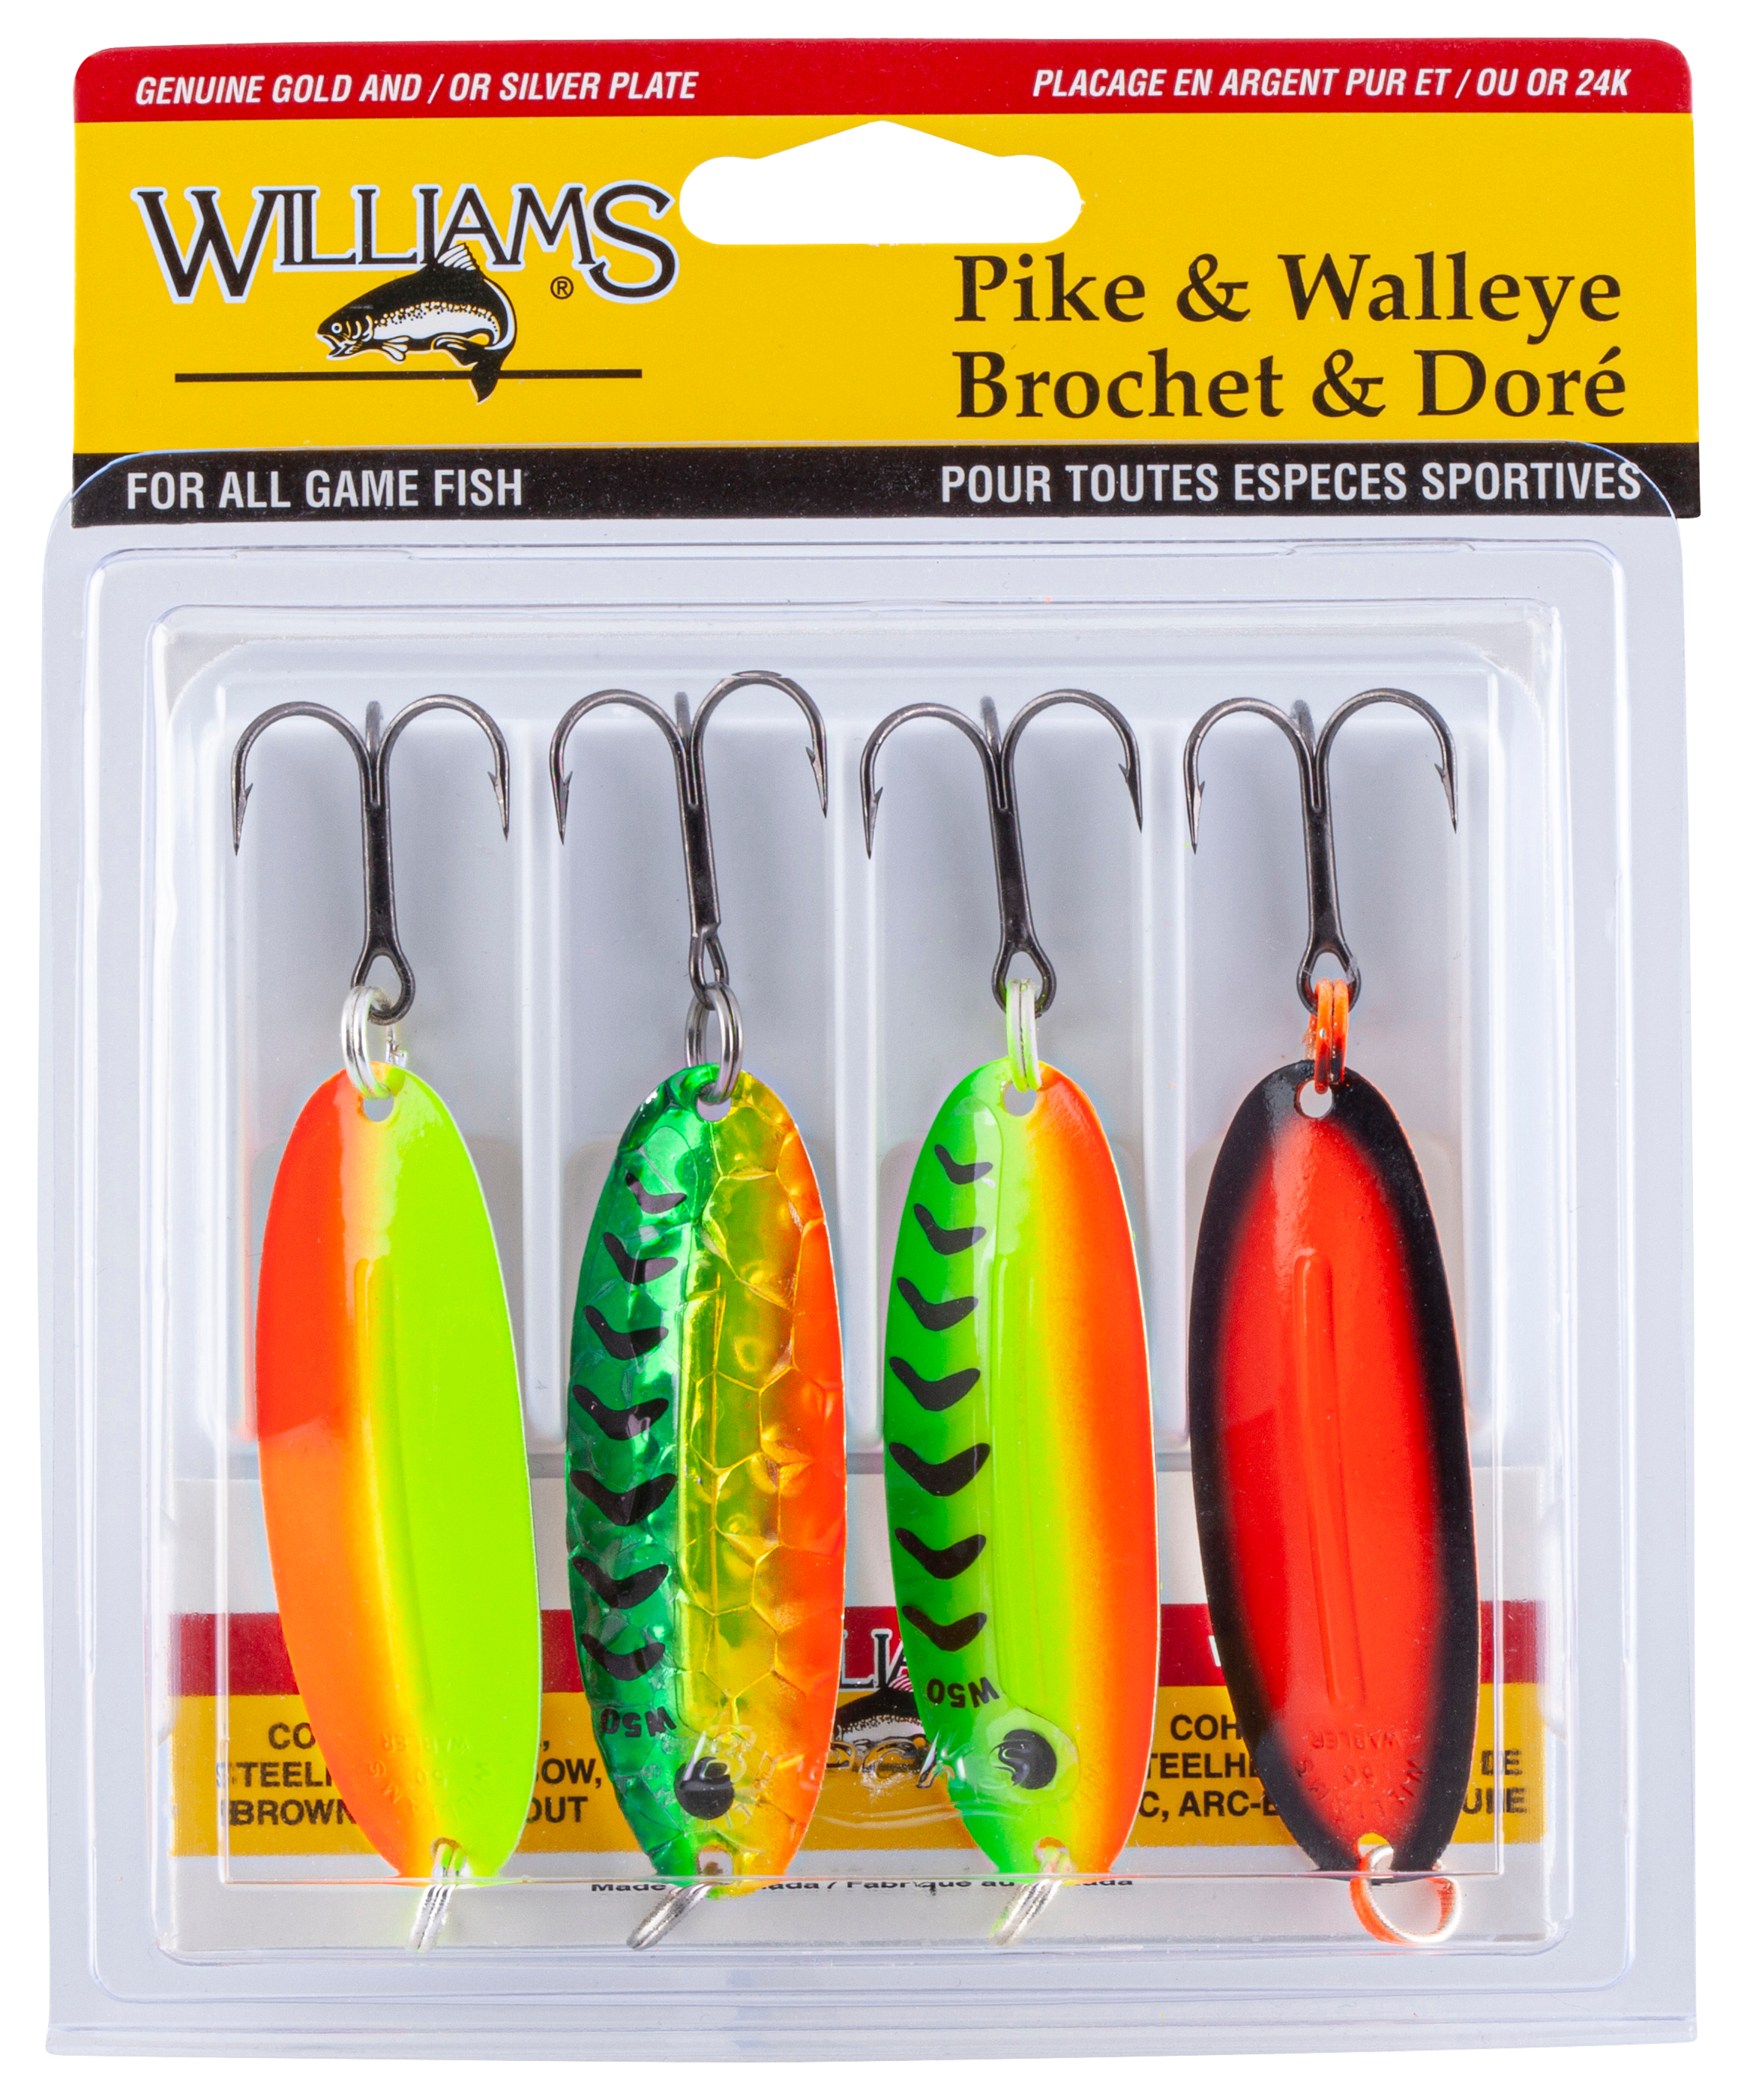 Bass Pro Shops Northern Pike Fishing Baits, Lures & Flies for sale